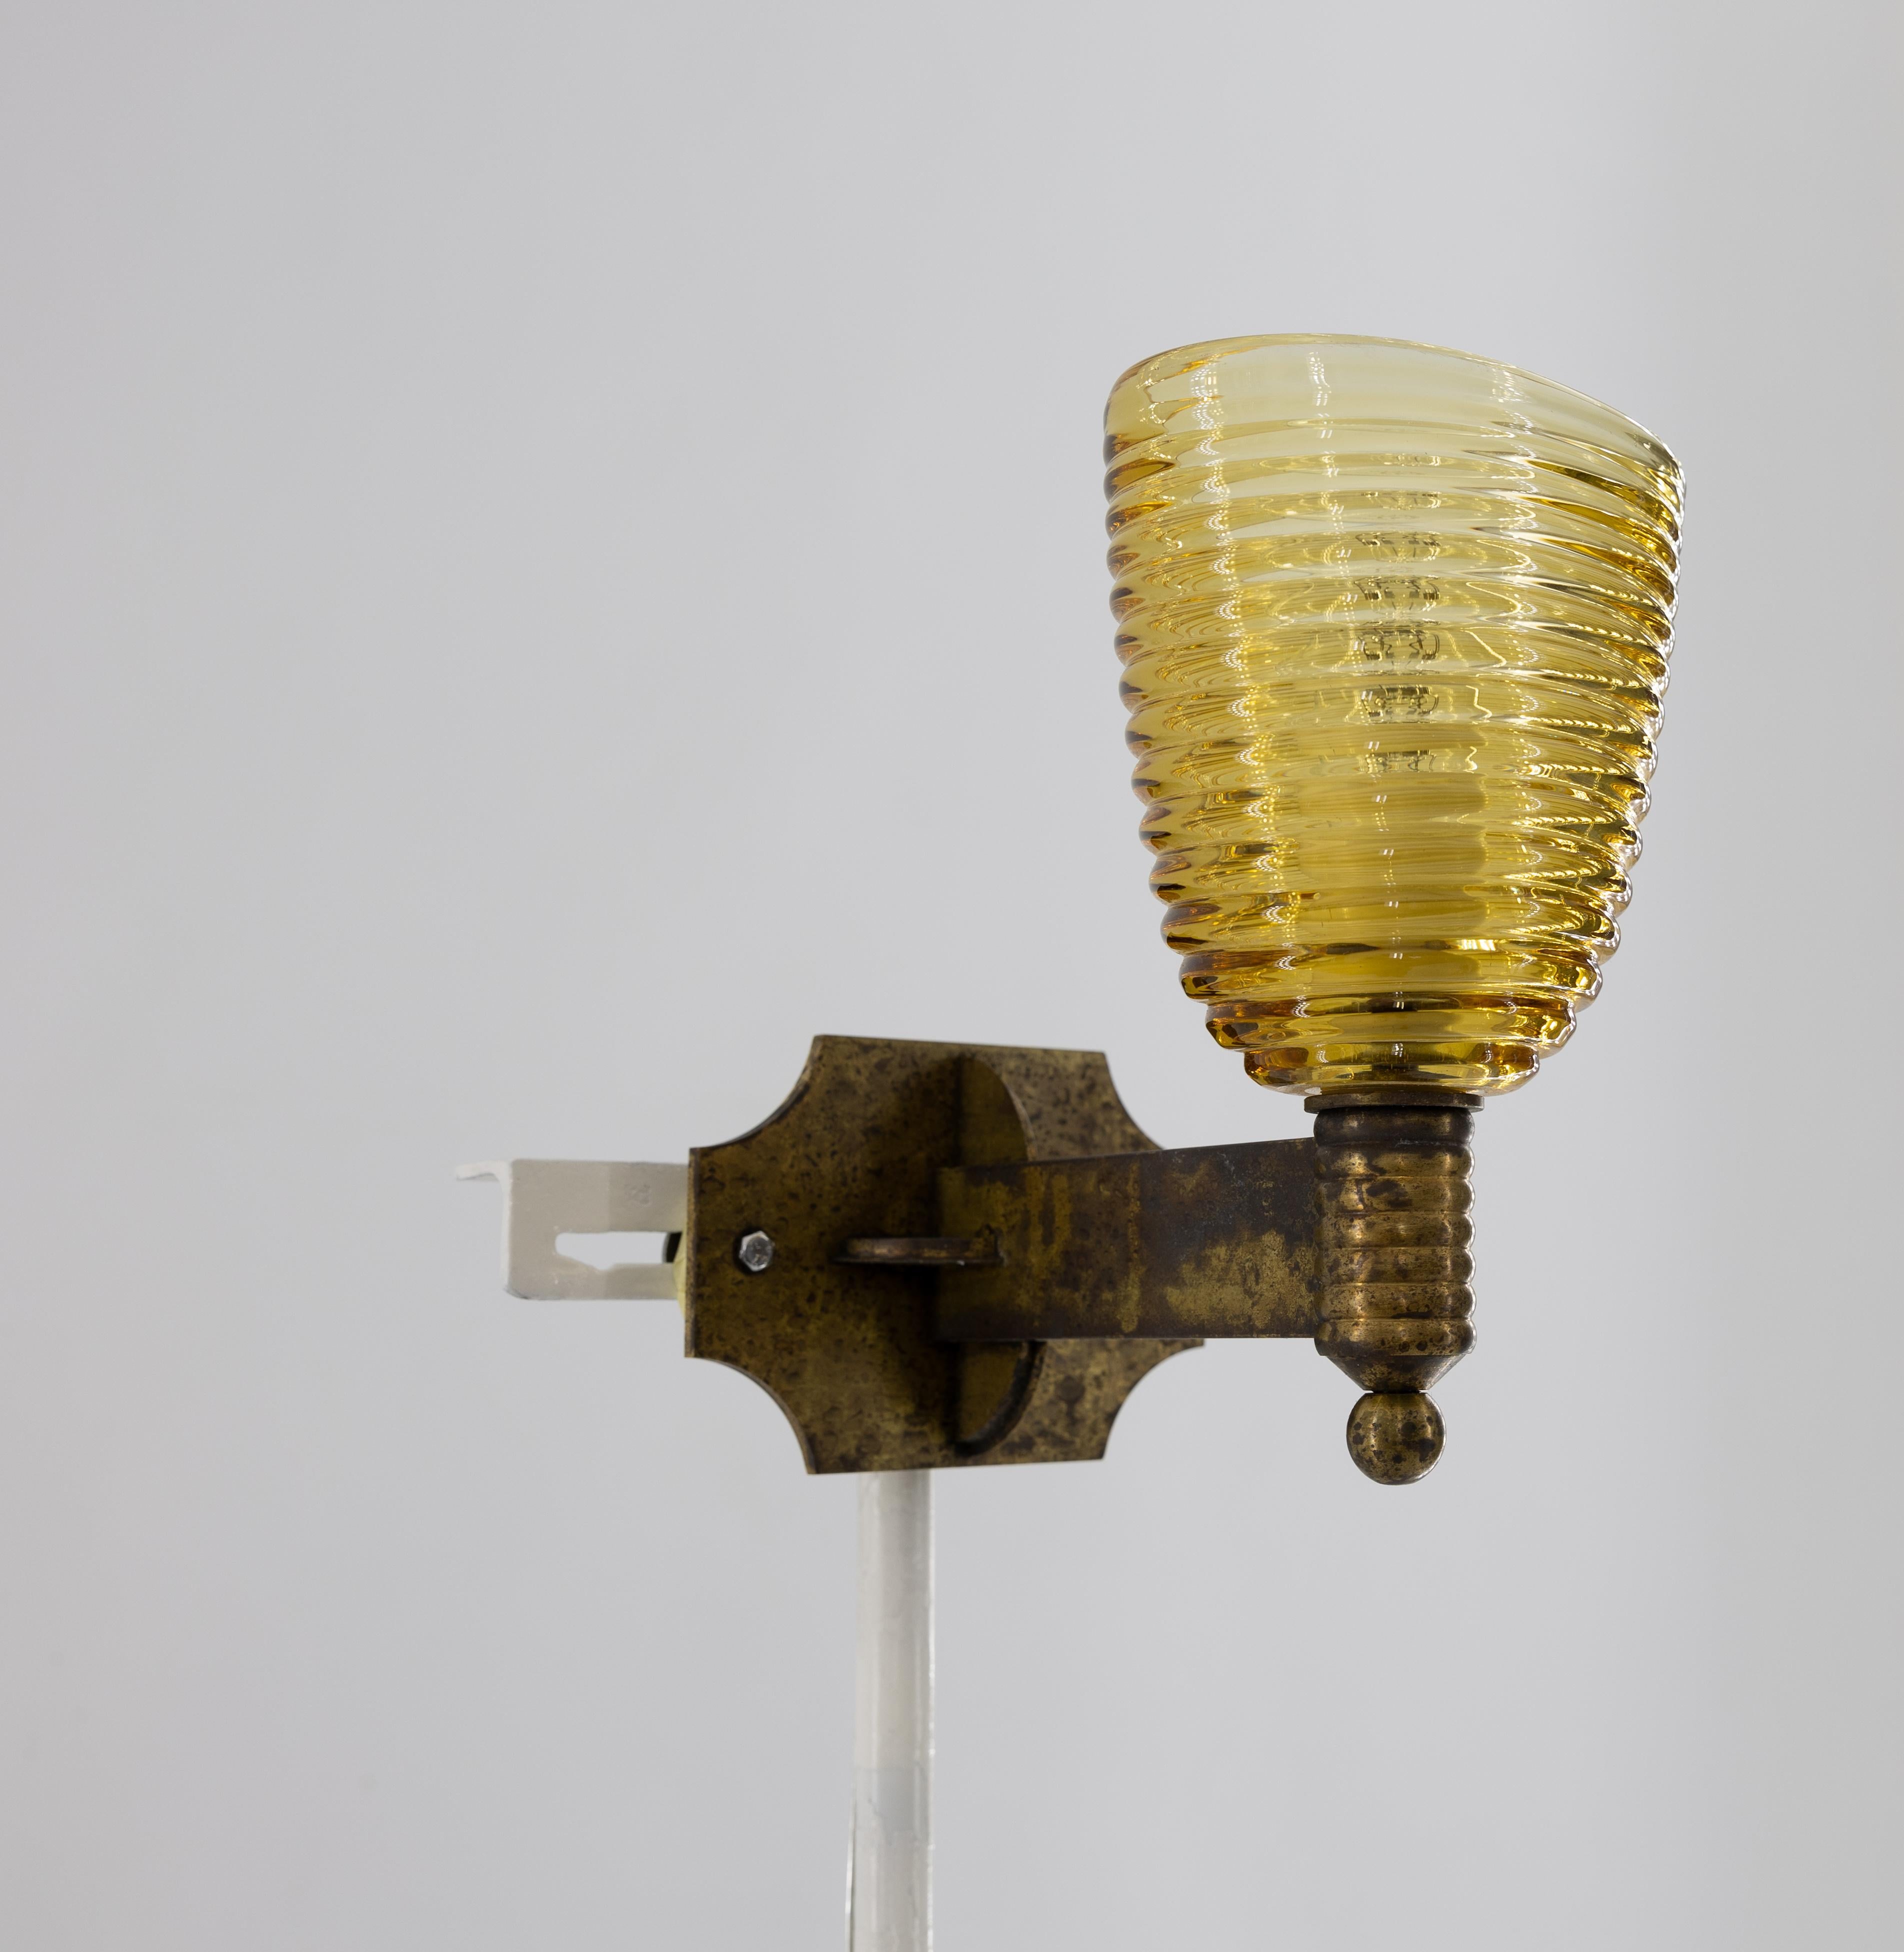 A Pair of Exquisite Art Deco Murano Glass Sconces in Amber and Brass, 1960s Italy.
This remarkable pair of Venetian sconces, masterfully crafted in the 1960s, epitomizes the artistry and craftsmanship of Murano glassmaking. Each sconce features an